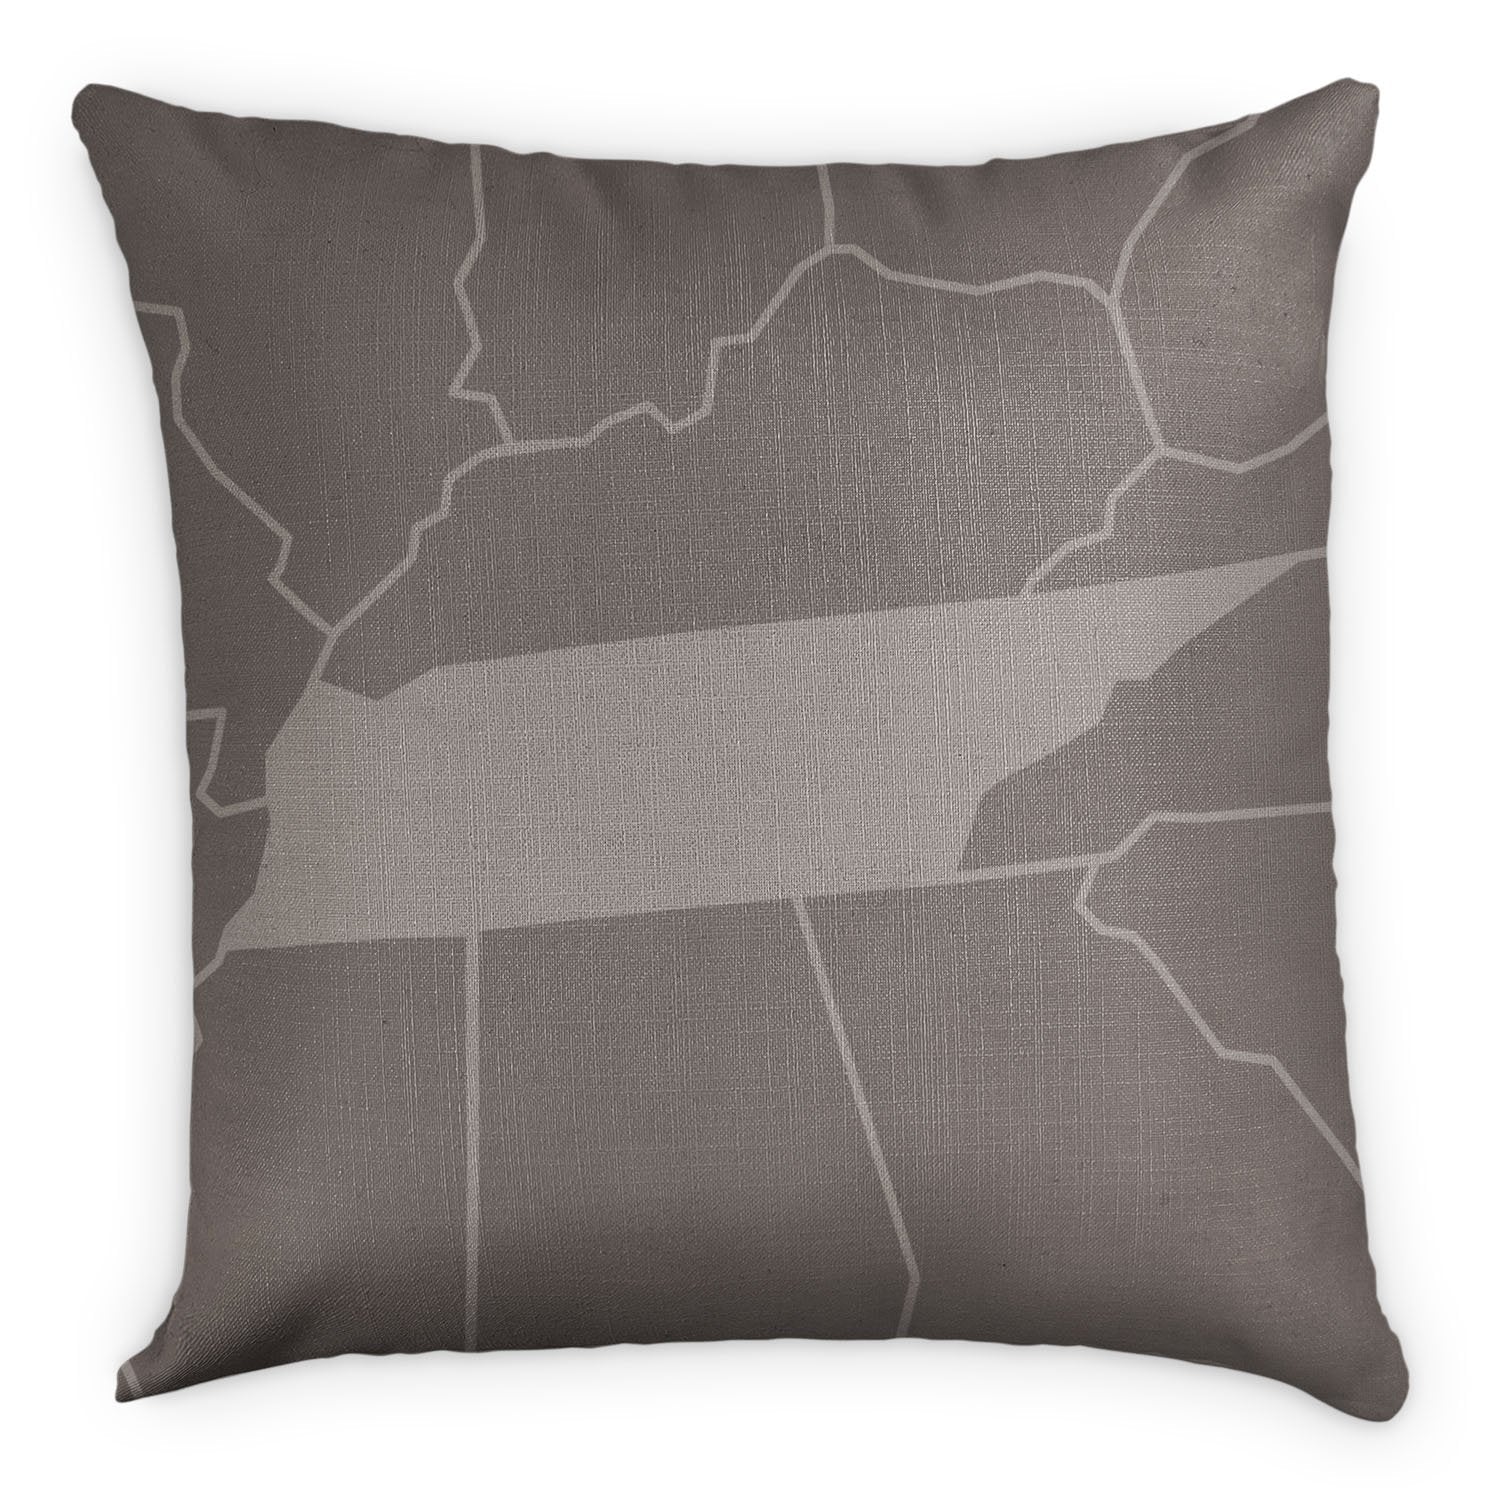 Tennessee Square Pillow - Linen -  - Knotty Tie Co.